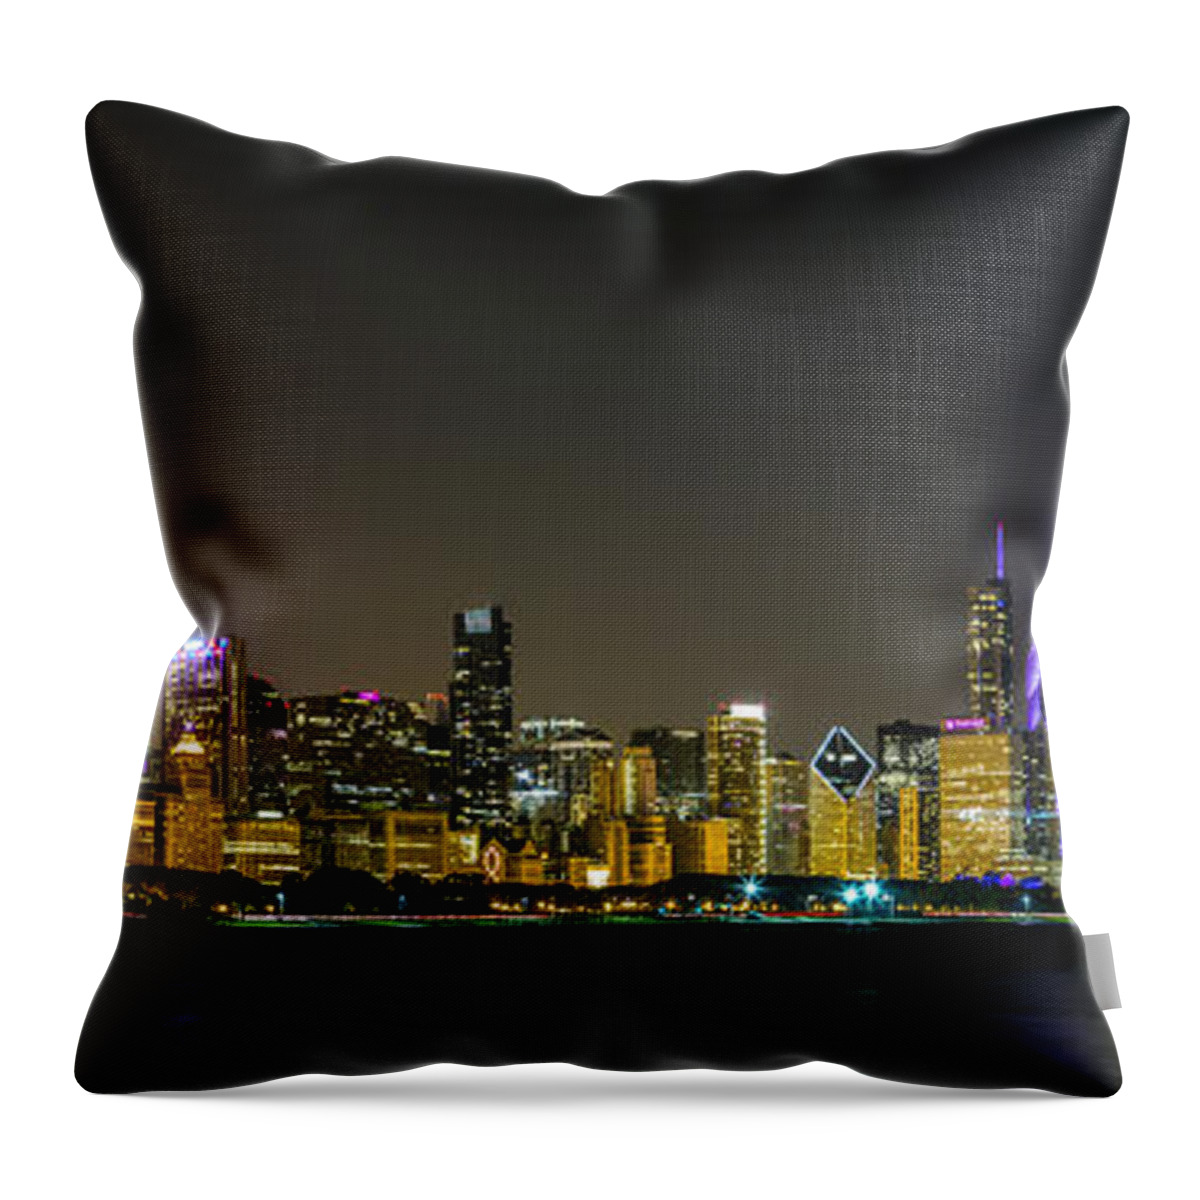 Chicago Throw Pillow featuring the photograph Chicago Night Panorama by Lev Kaytsner